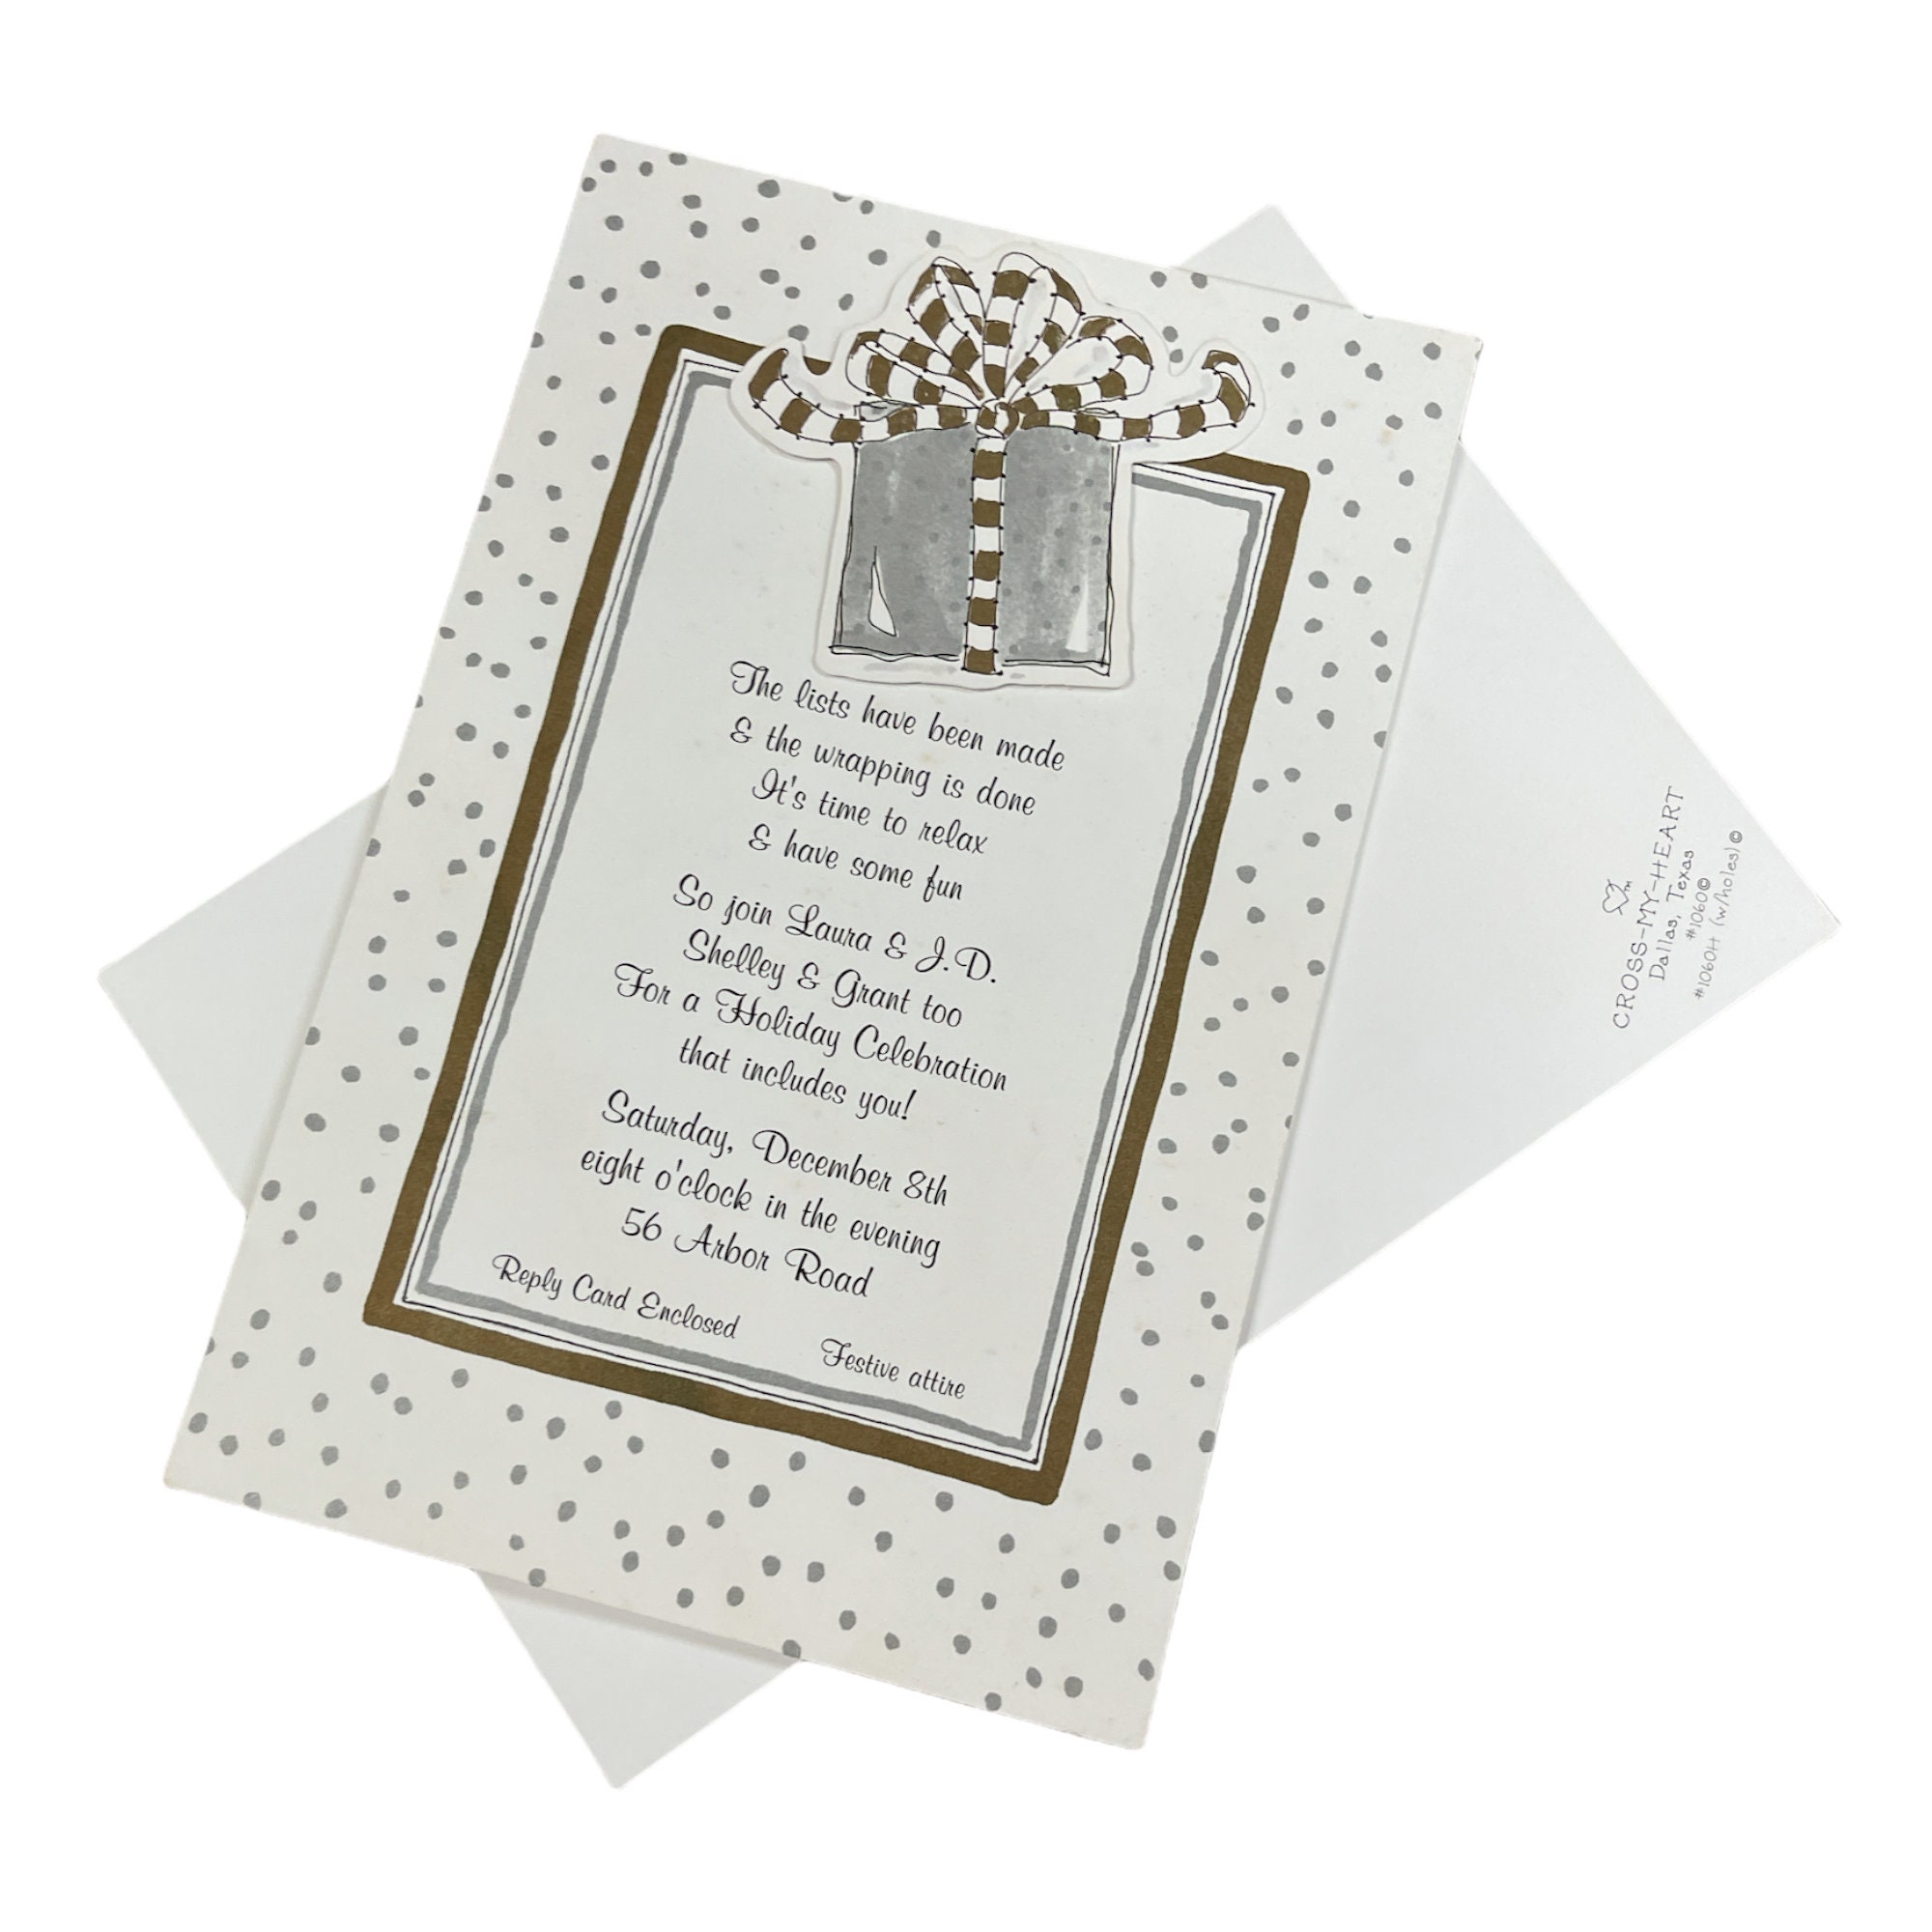 #FUHGEDABOUDIT Blank Notecards W/ Decorated Envelopes-10 Count 